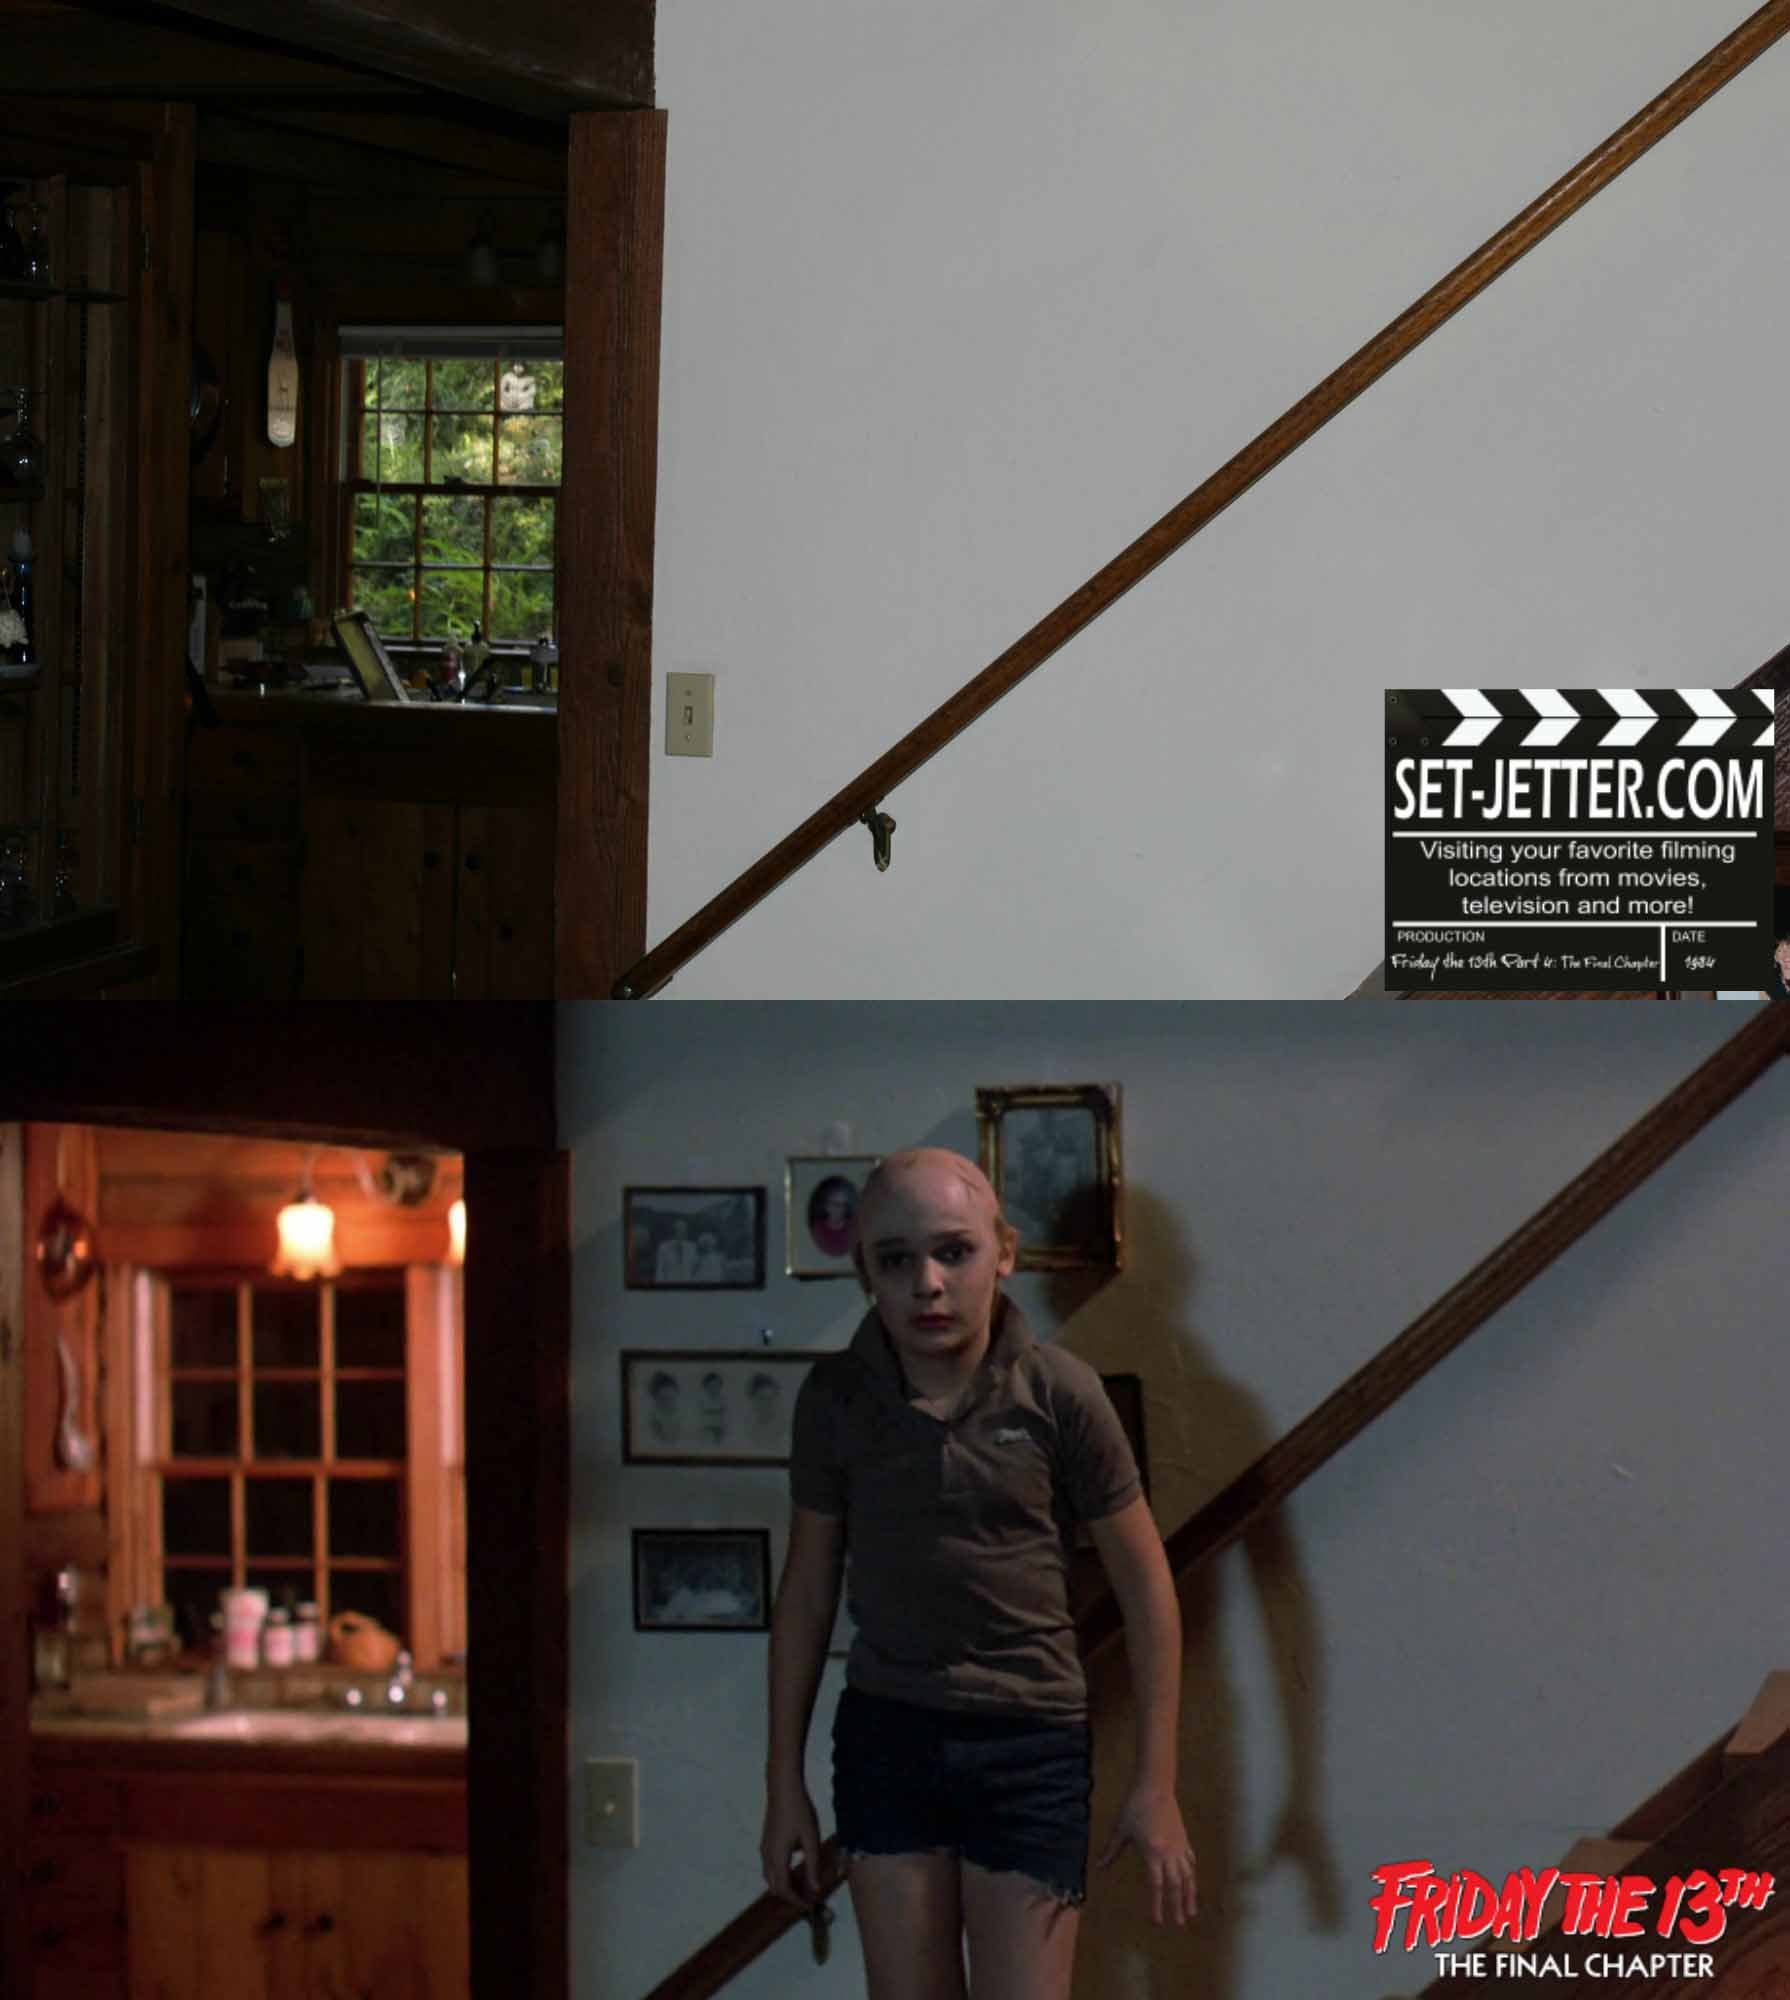 Friday the 13th The Final Chapter comparison 355.jpg